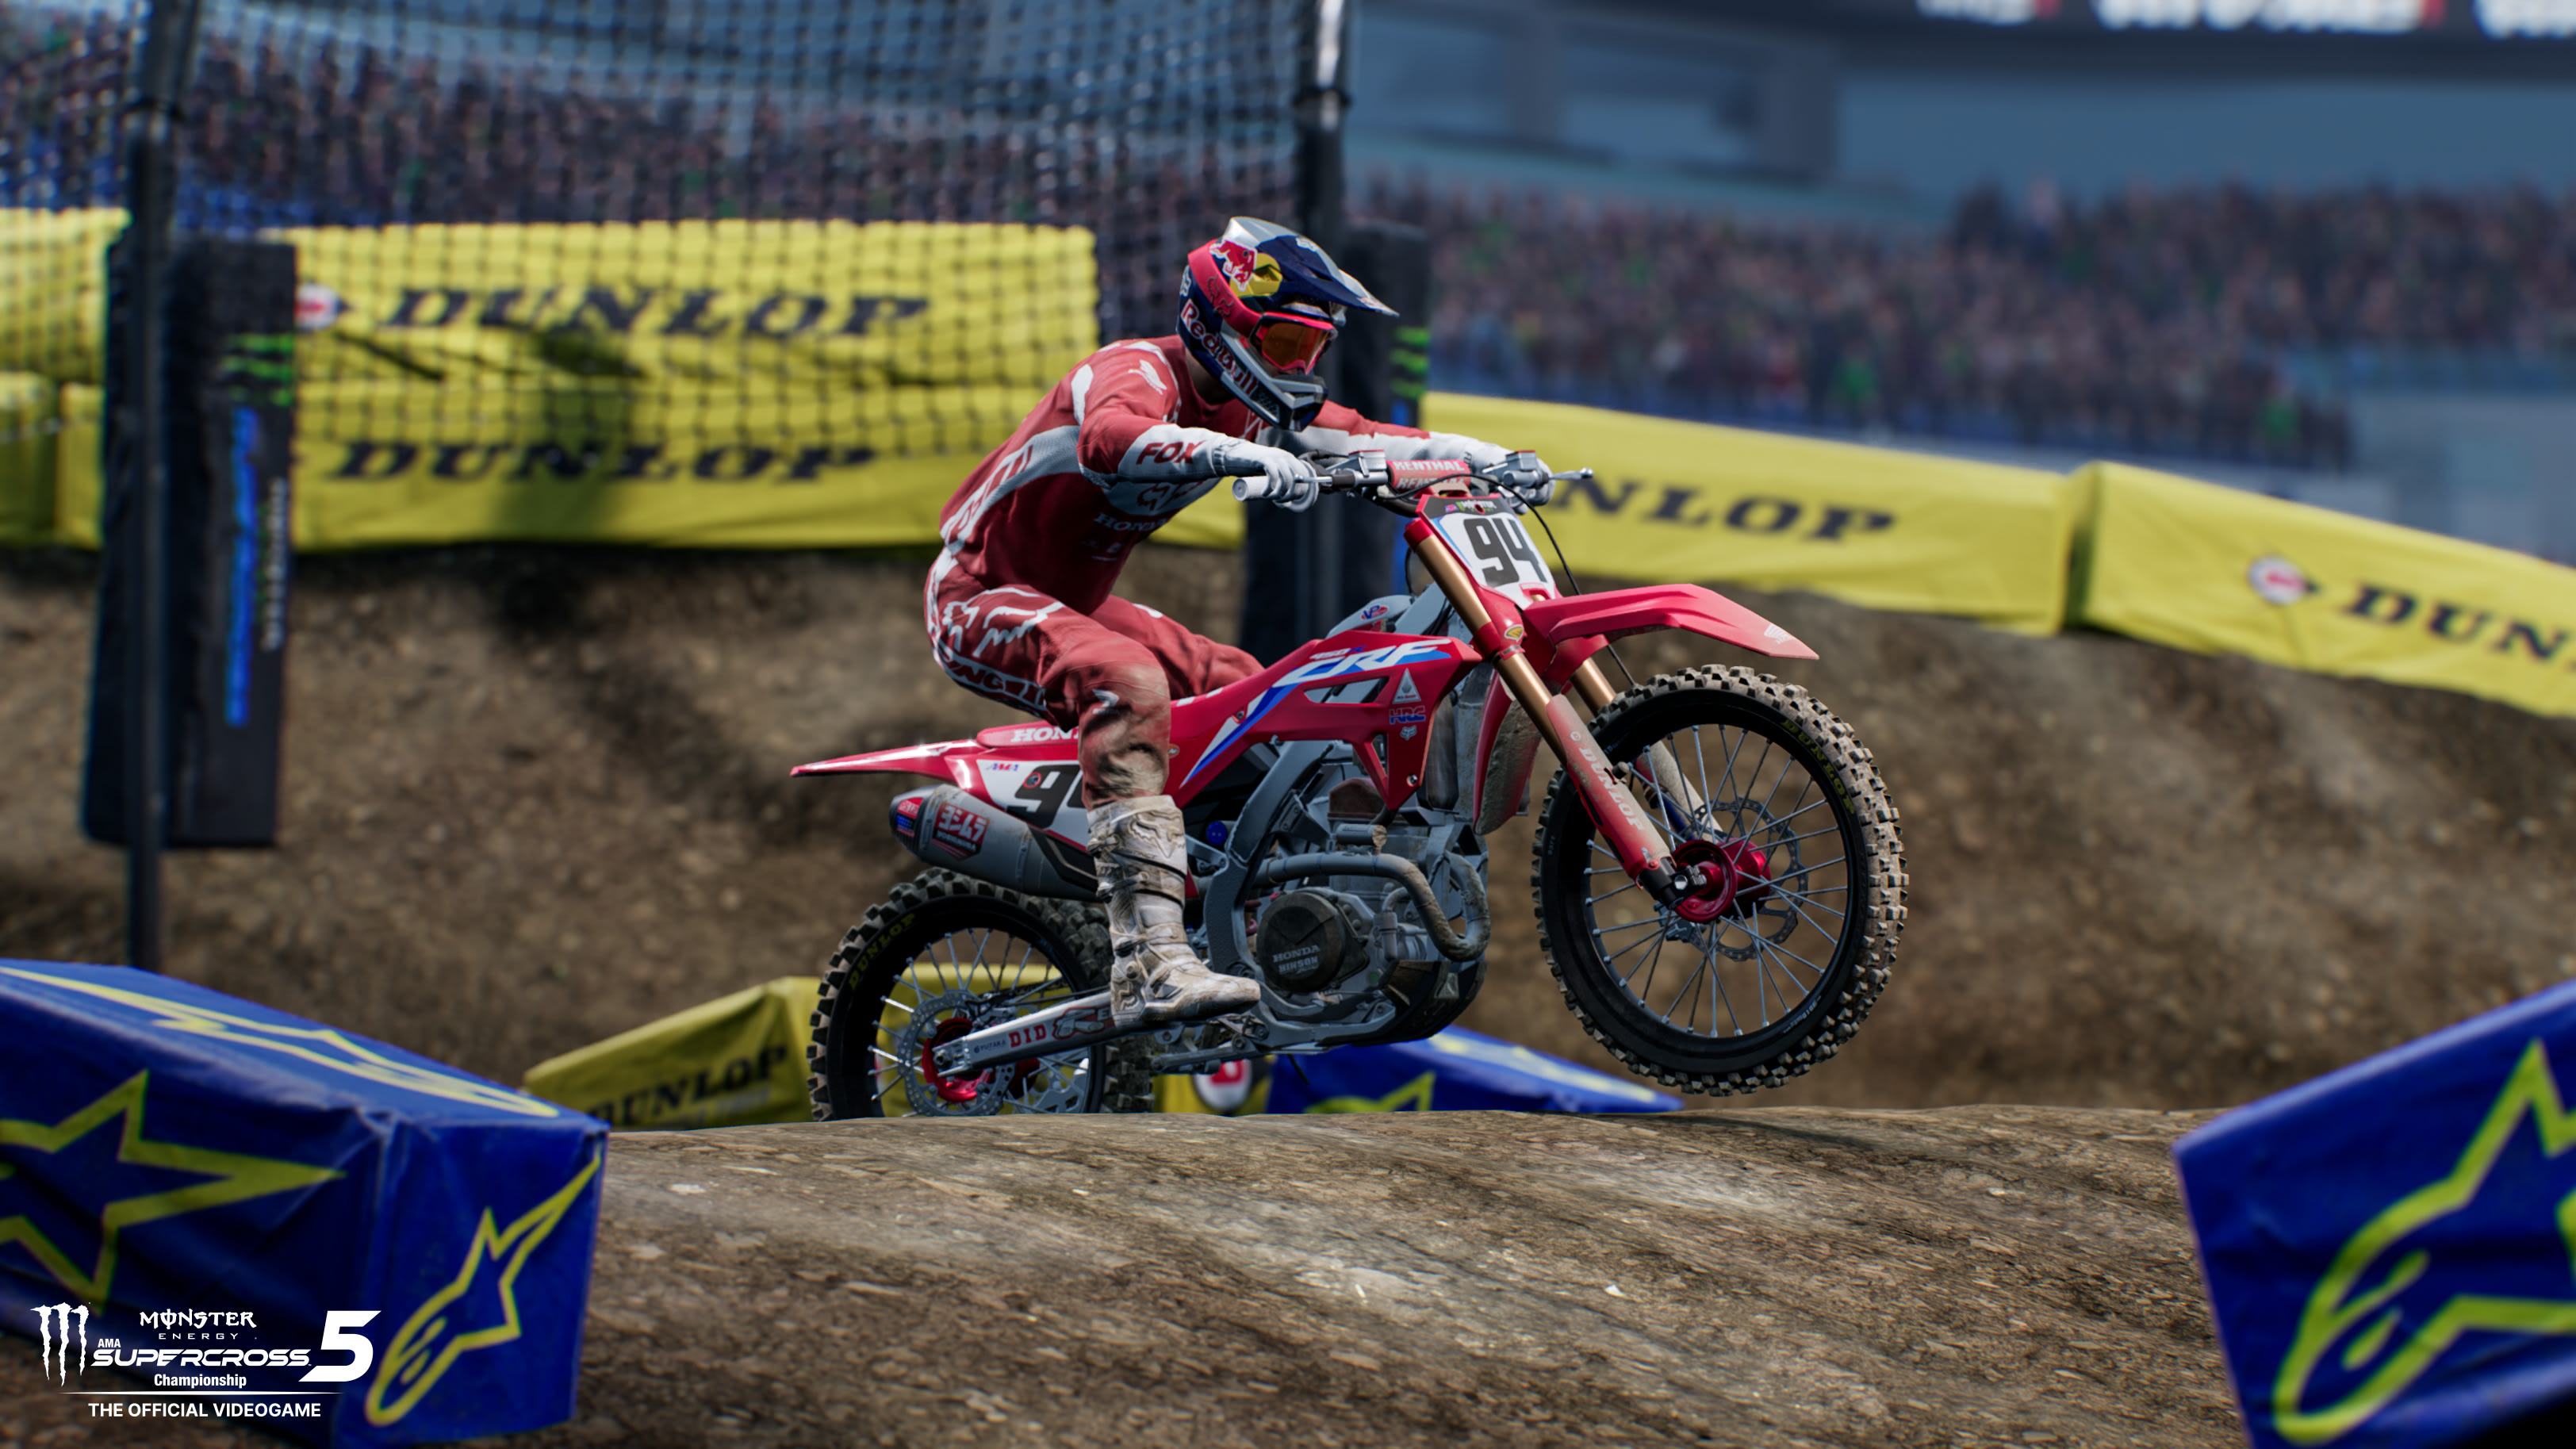 monster energy supercross the official videogame 5, video game